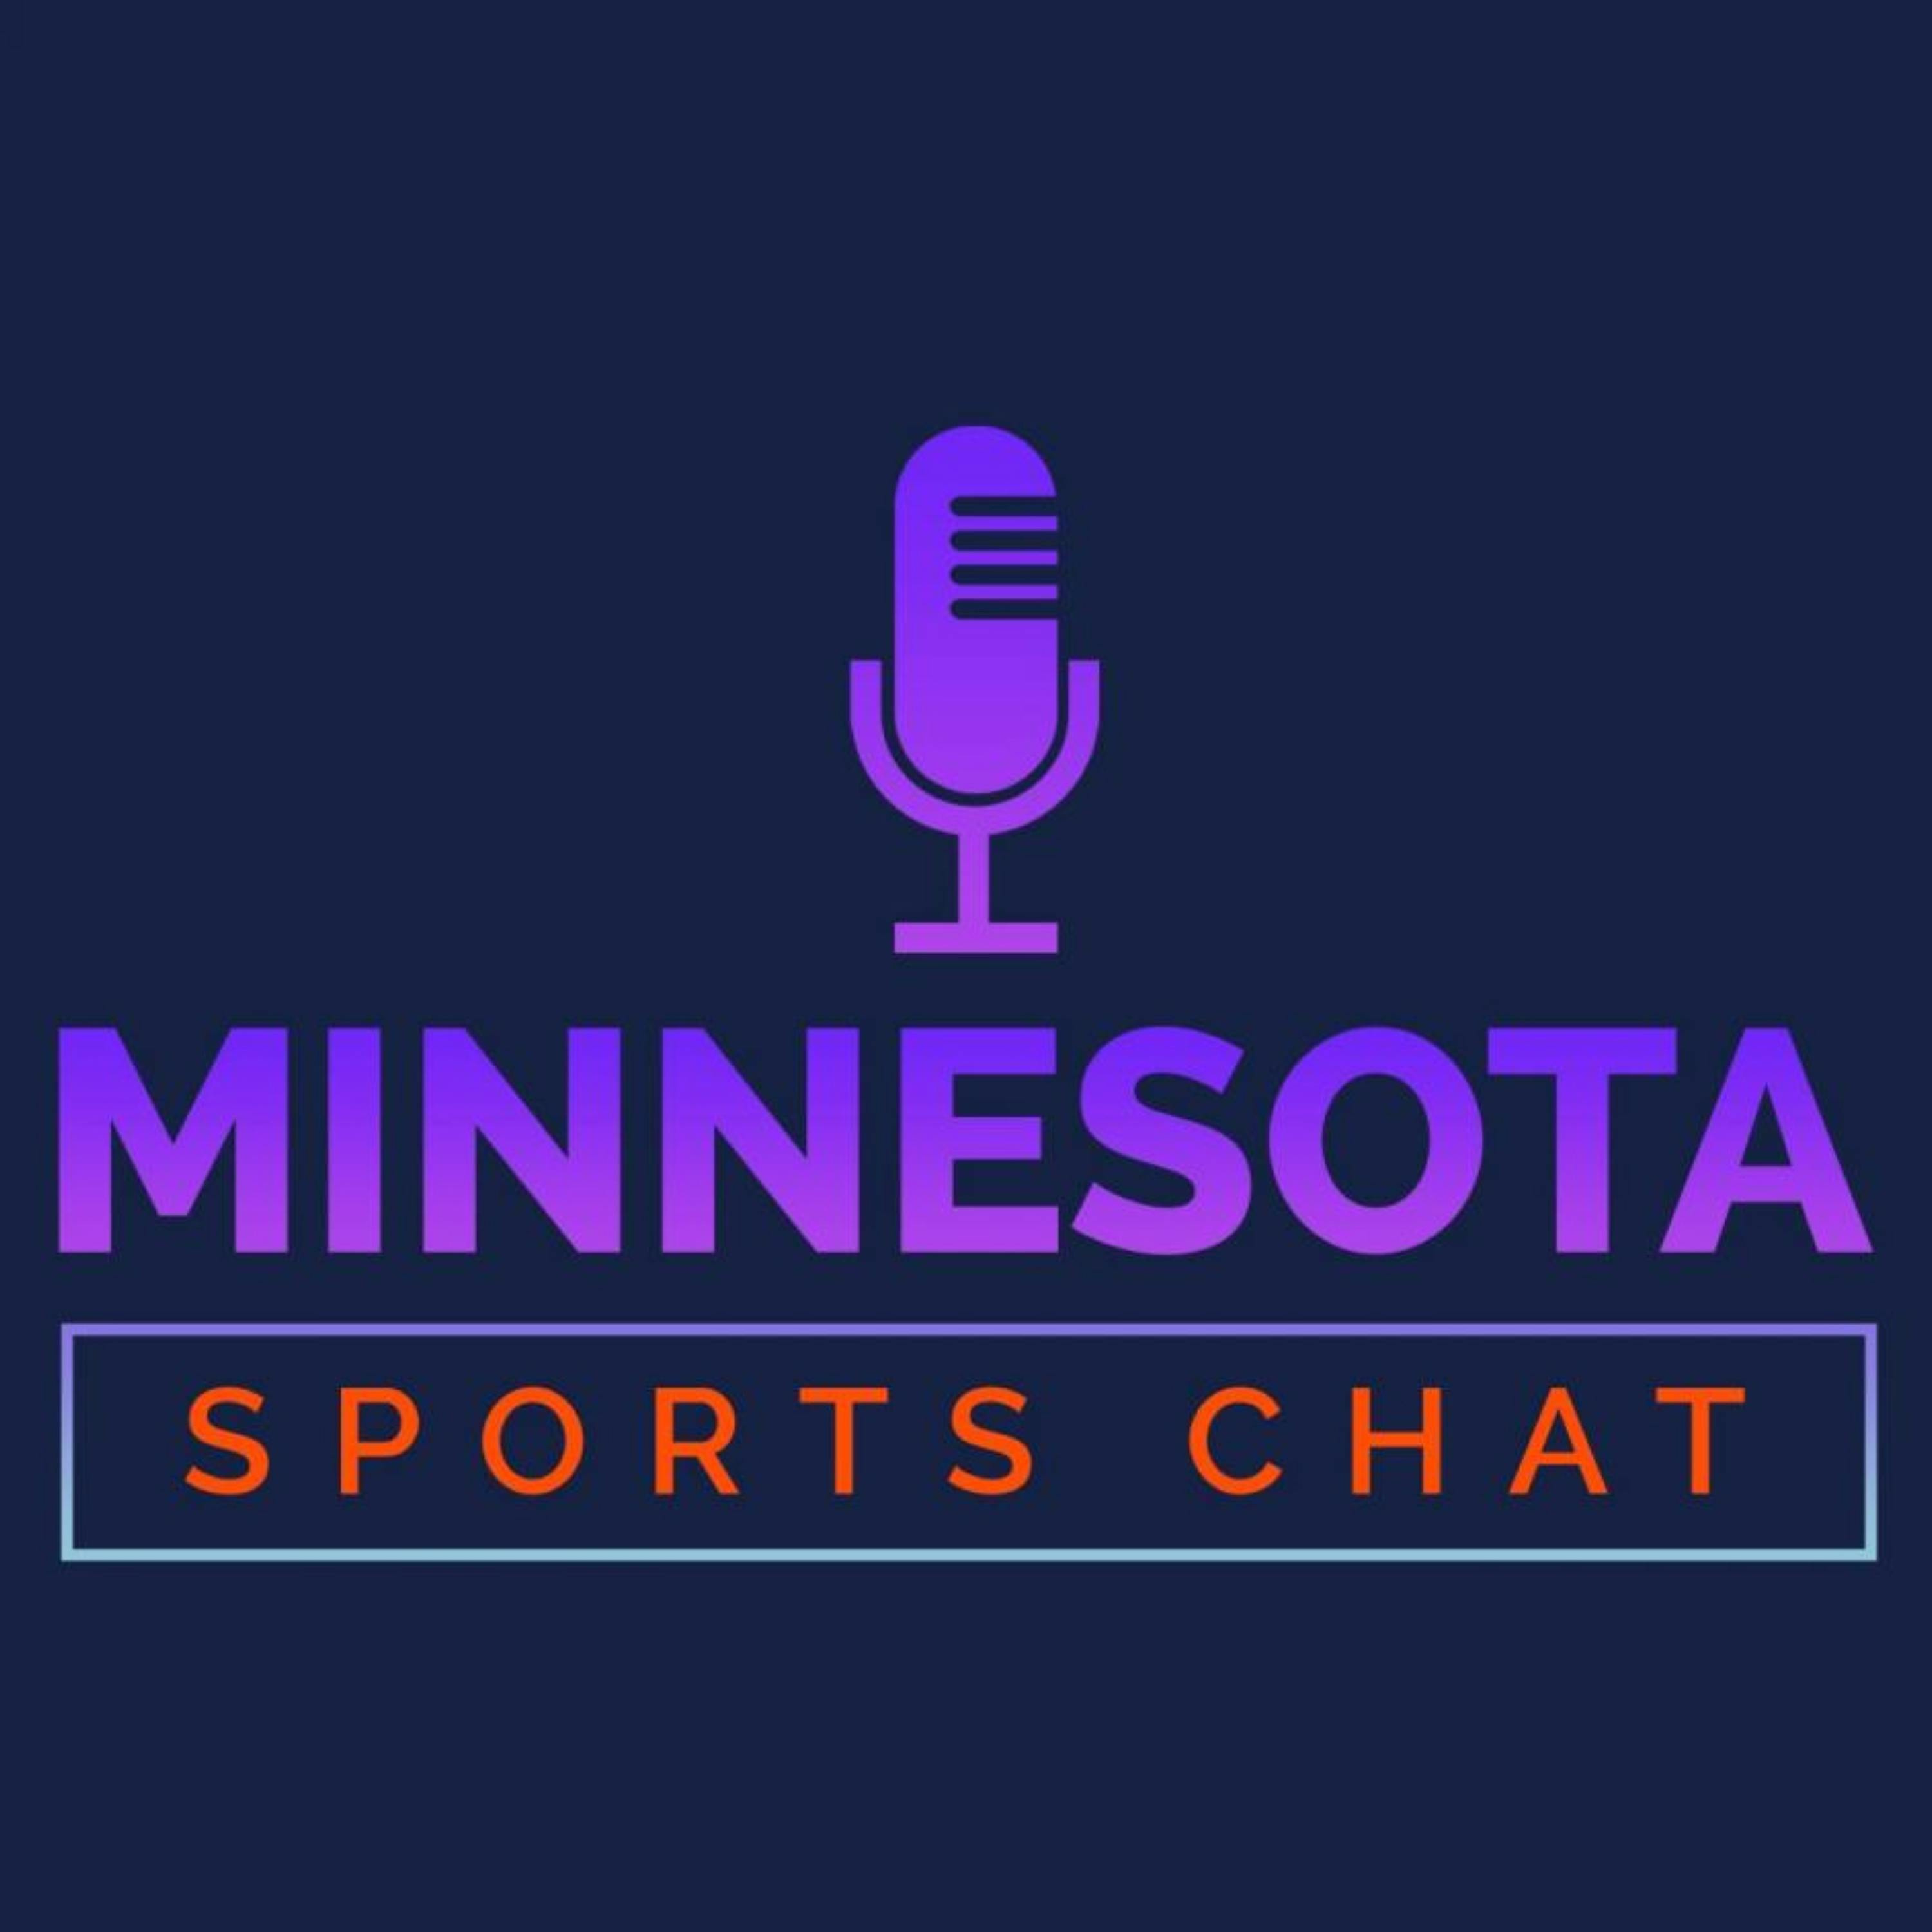 MINNESOTA SPORTS CHAT: Minnesota Vikings get younger and the Gophers are getting better! - Edition #170